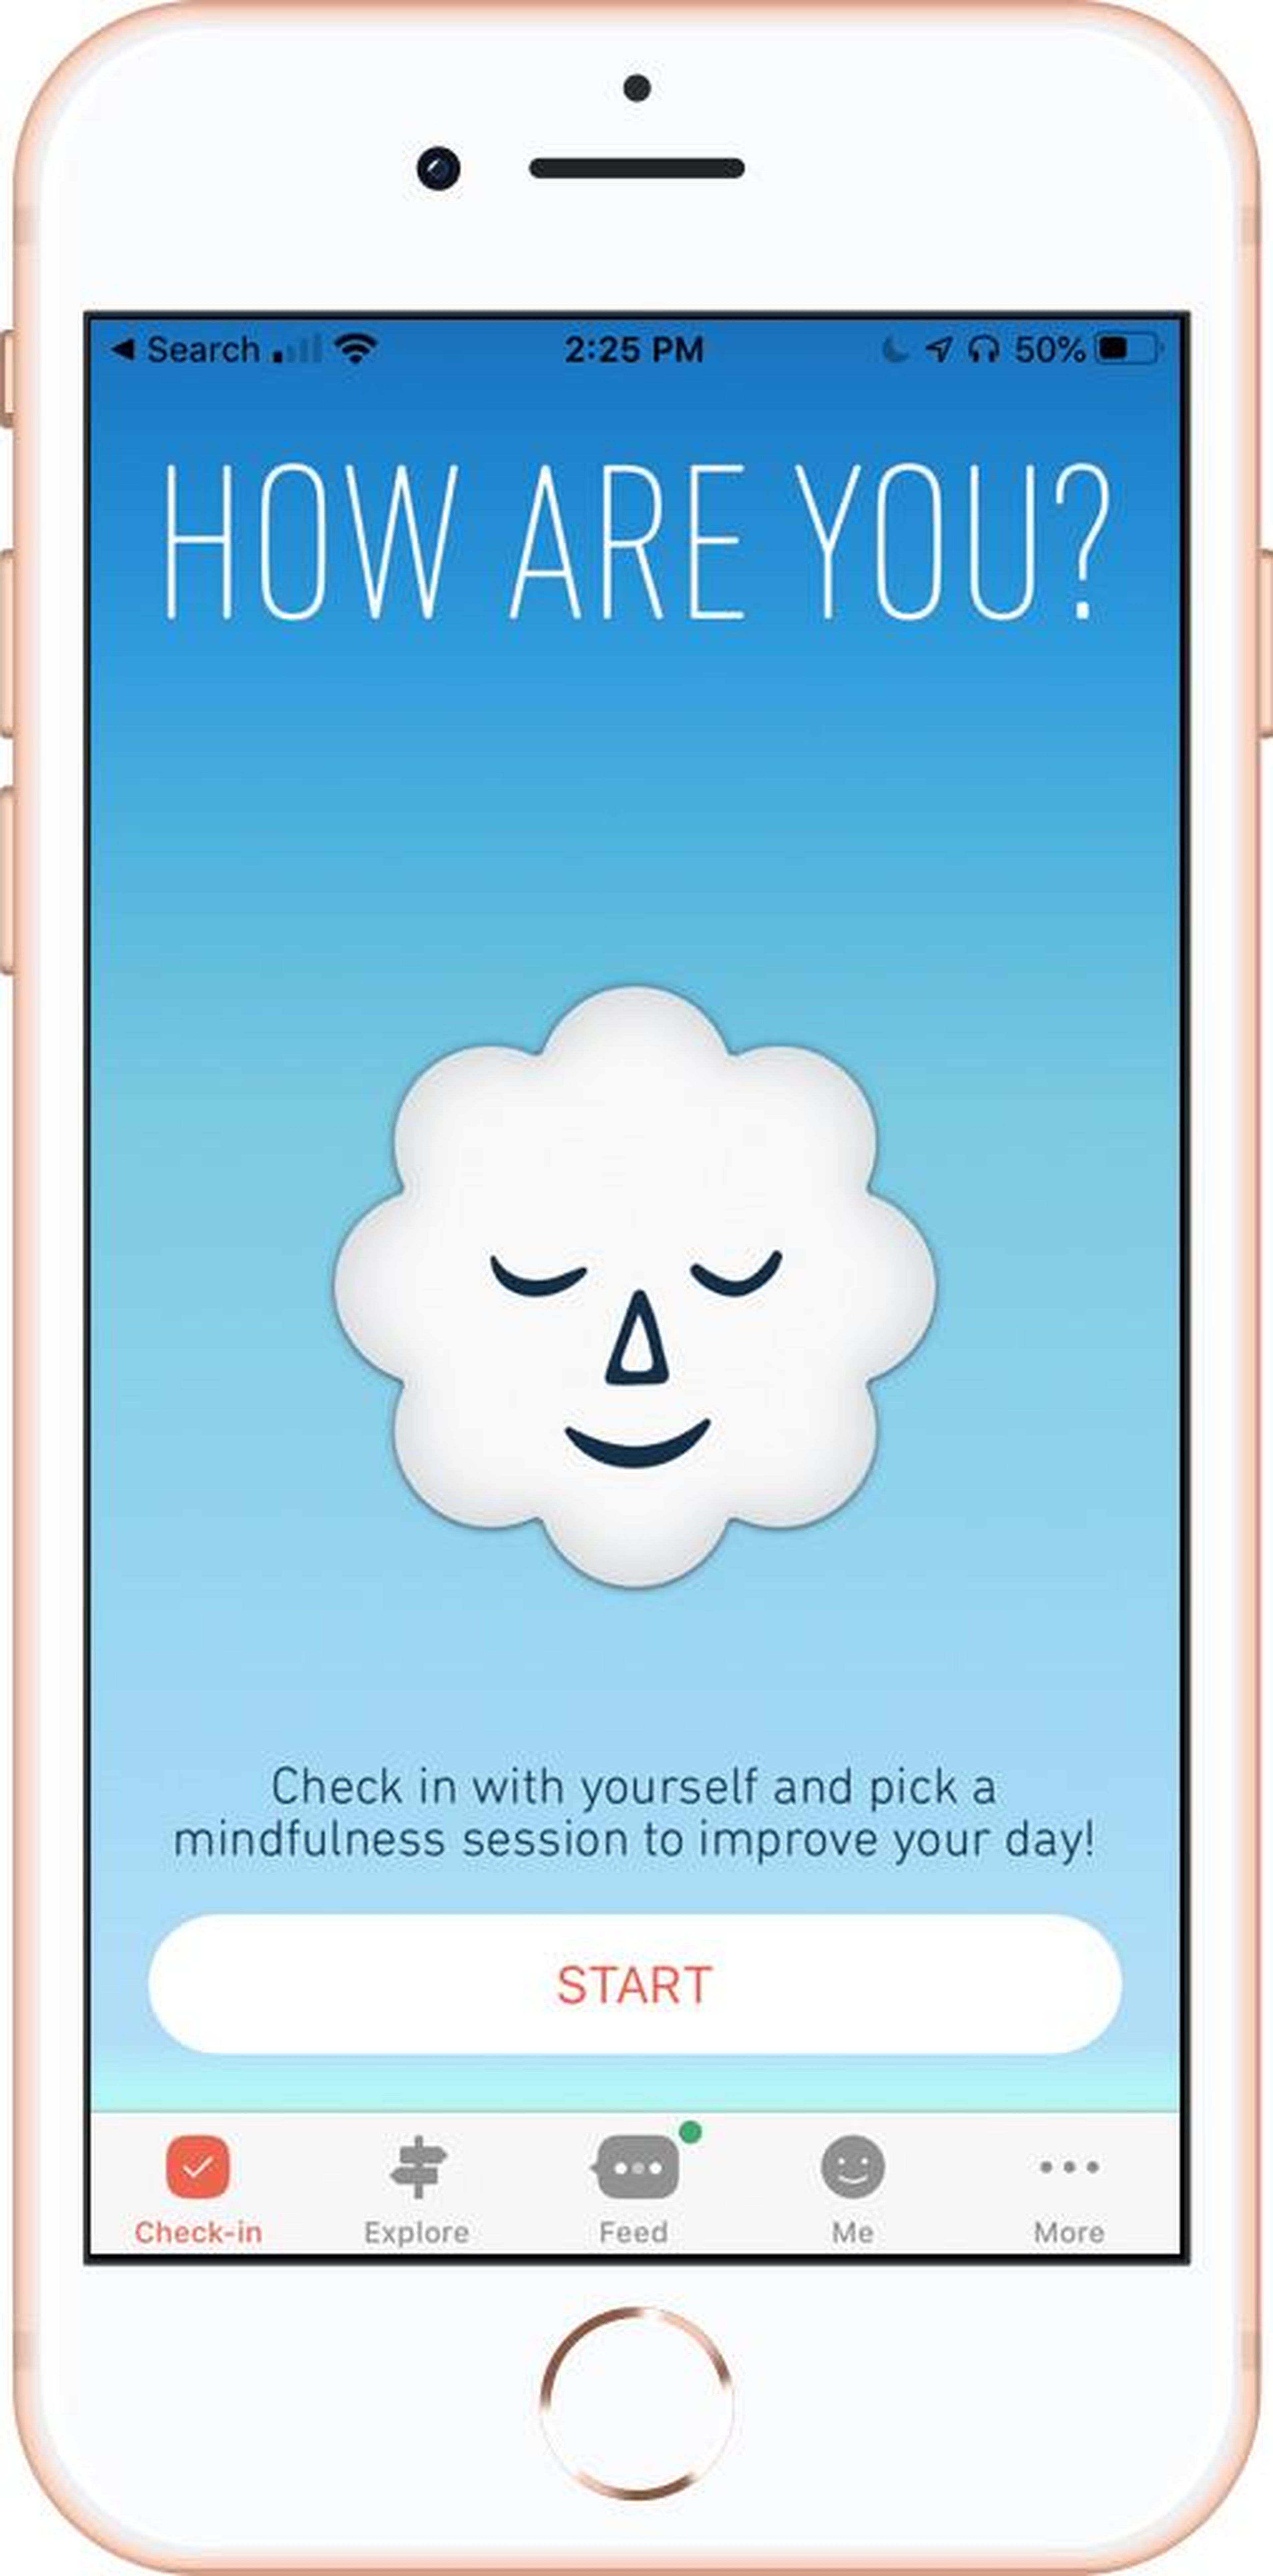 6. Try meditating in your seat with apps like Breathe.